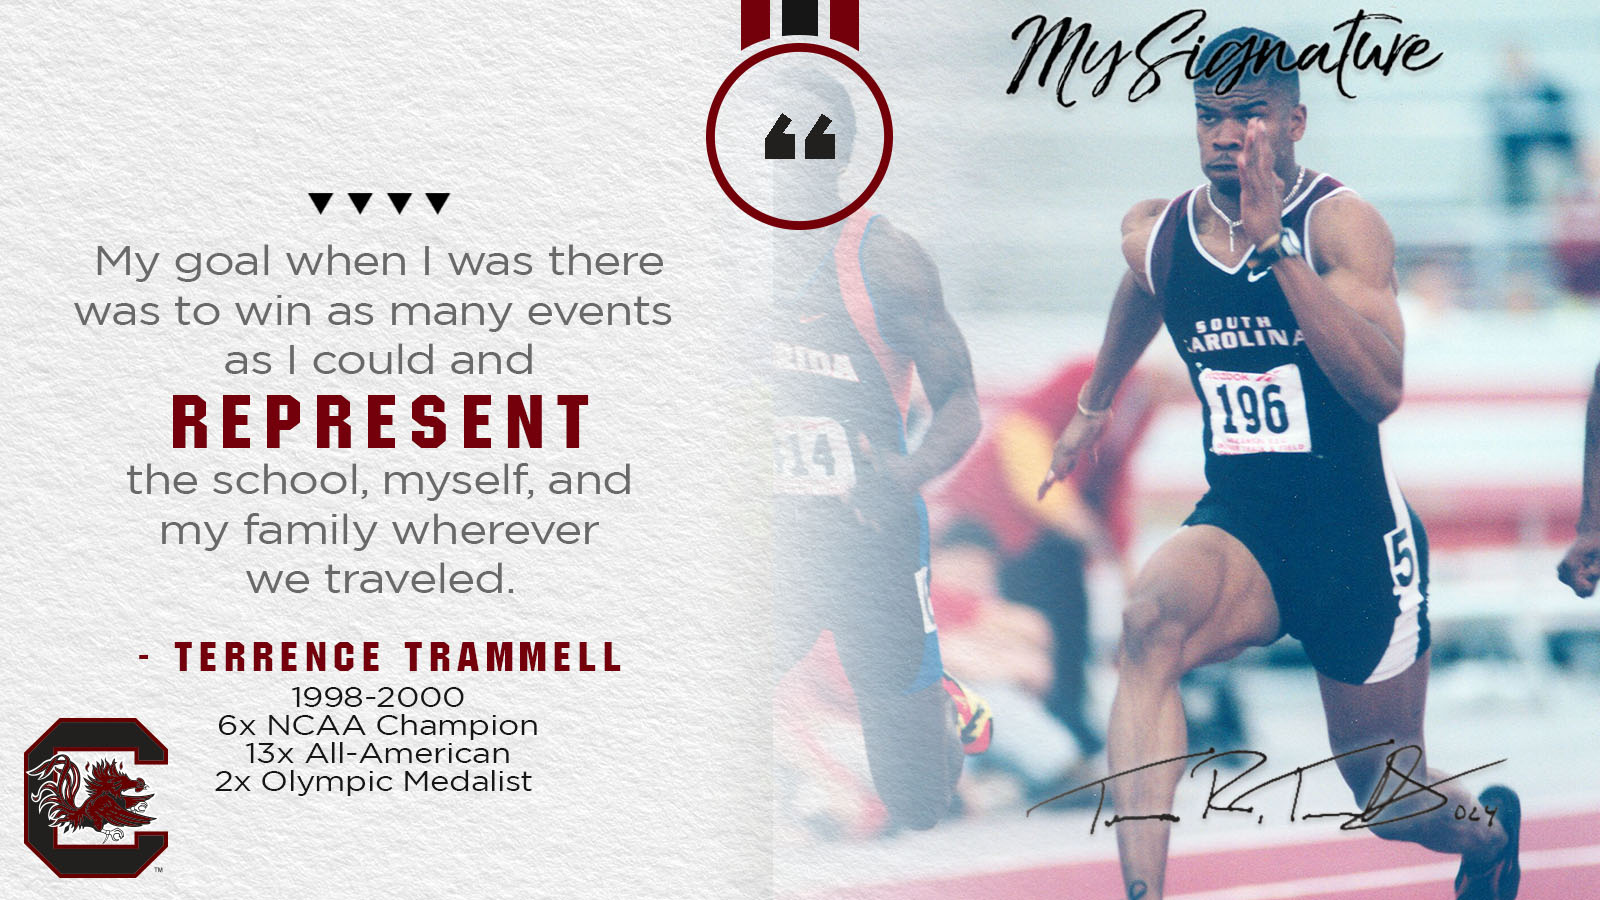 My Signature: Terrence Trammell is Humble in Having Jersey Retired